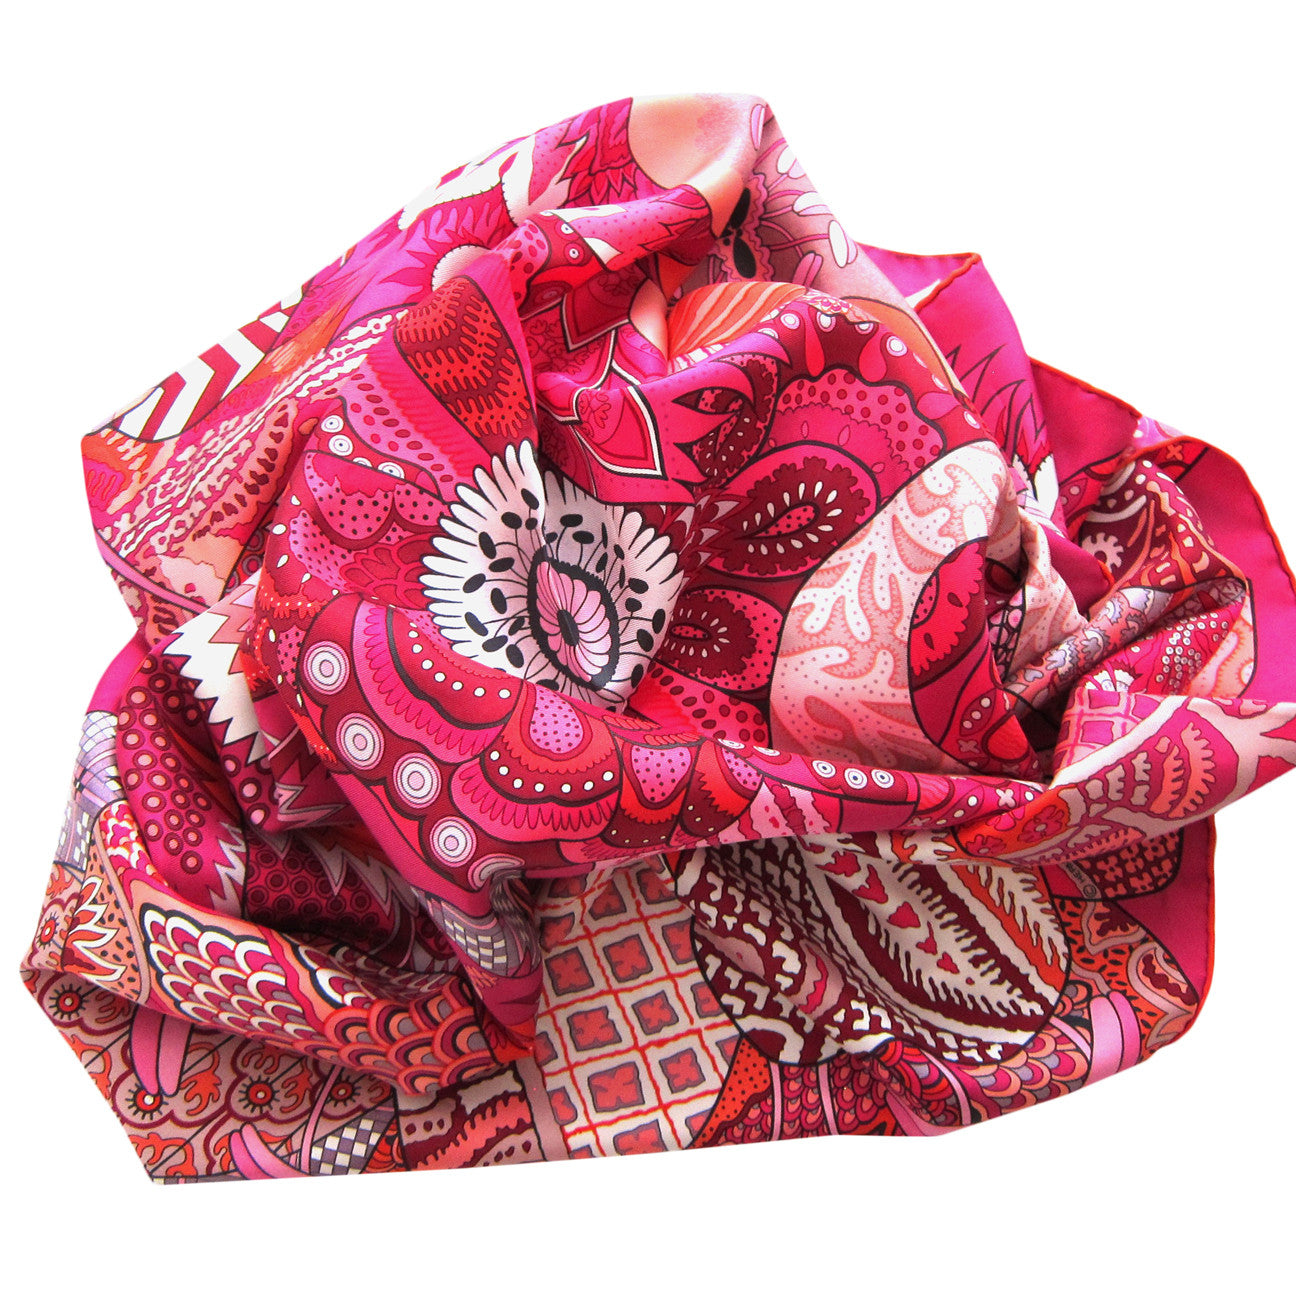 Sold at Auction: Hermes Caraibes Pink Silk Scarf